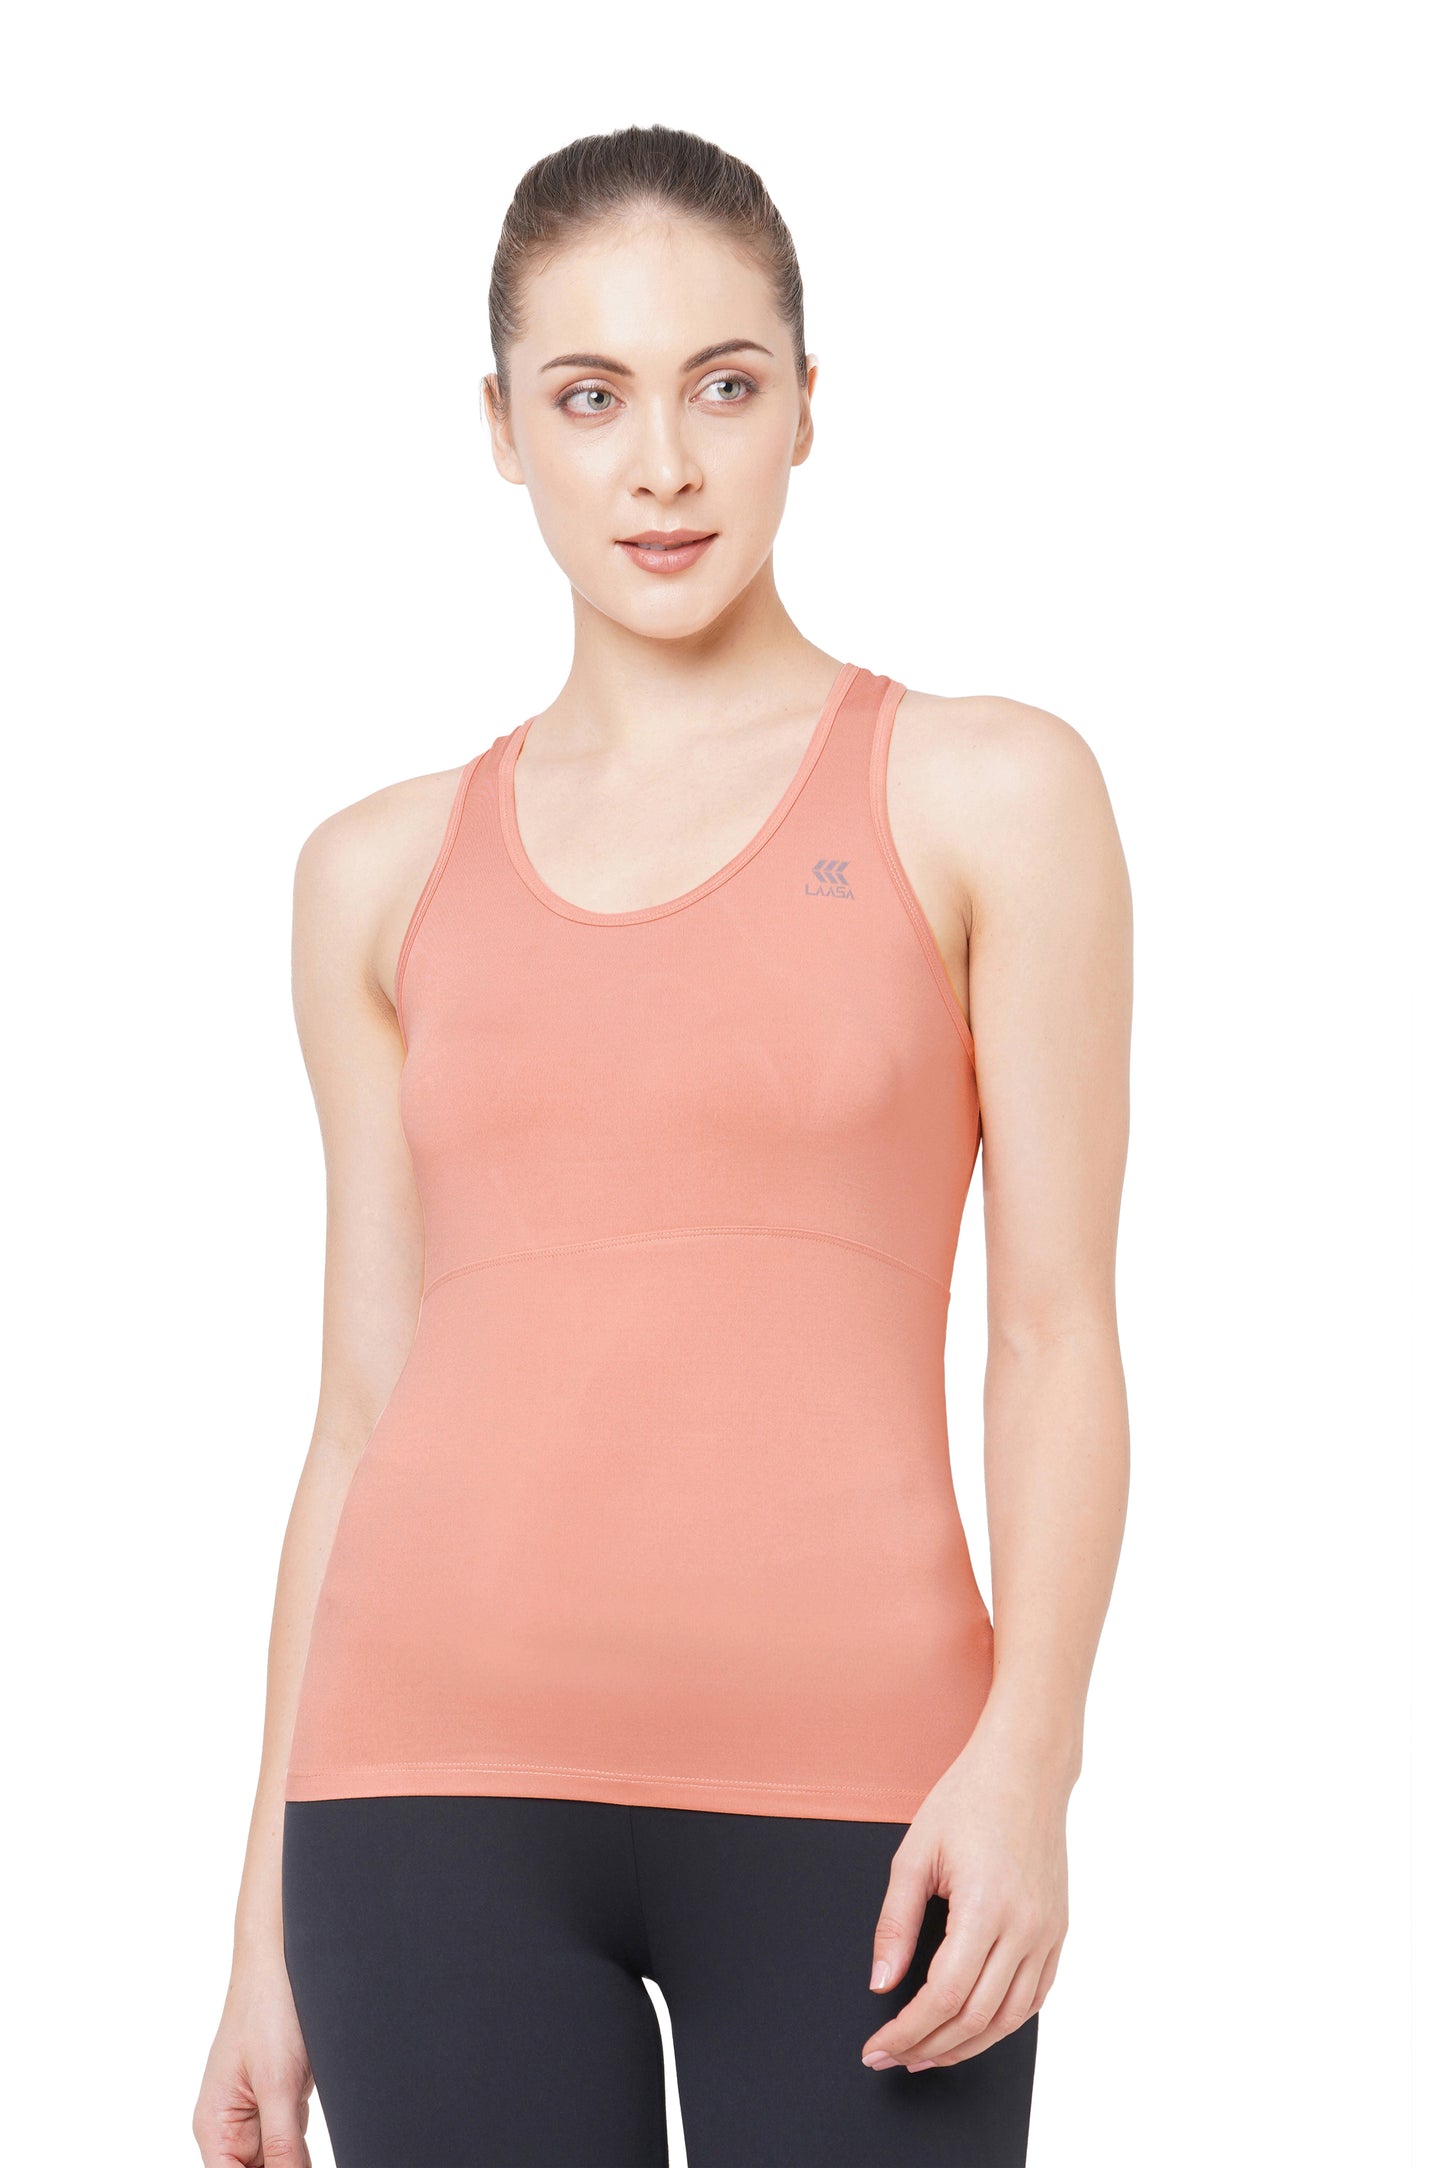 LUXE JUST-DRY TRAINING TANK TOP FOR WOMEN